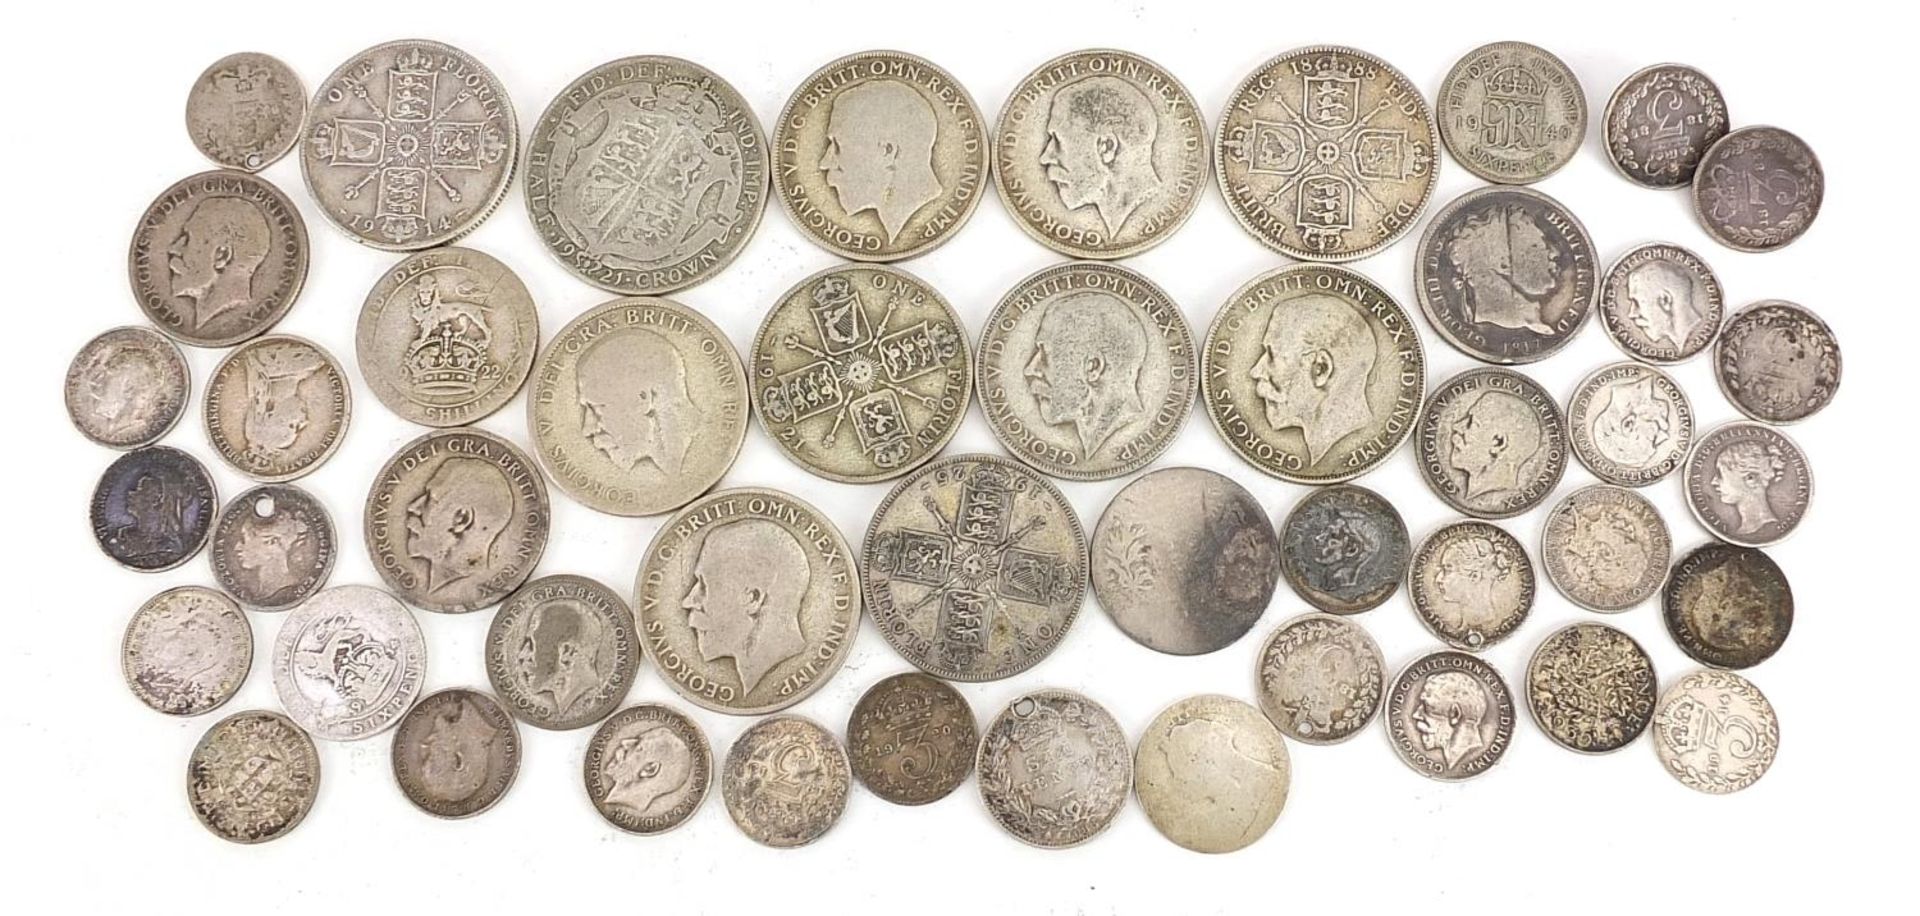 Victorian and later British coinage including florins, shillings and sixpences, 200g